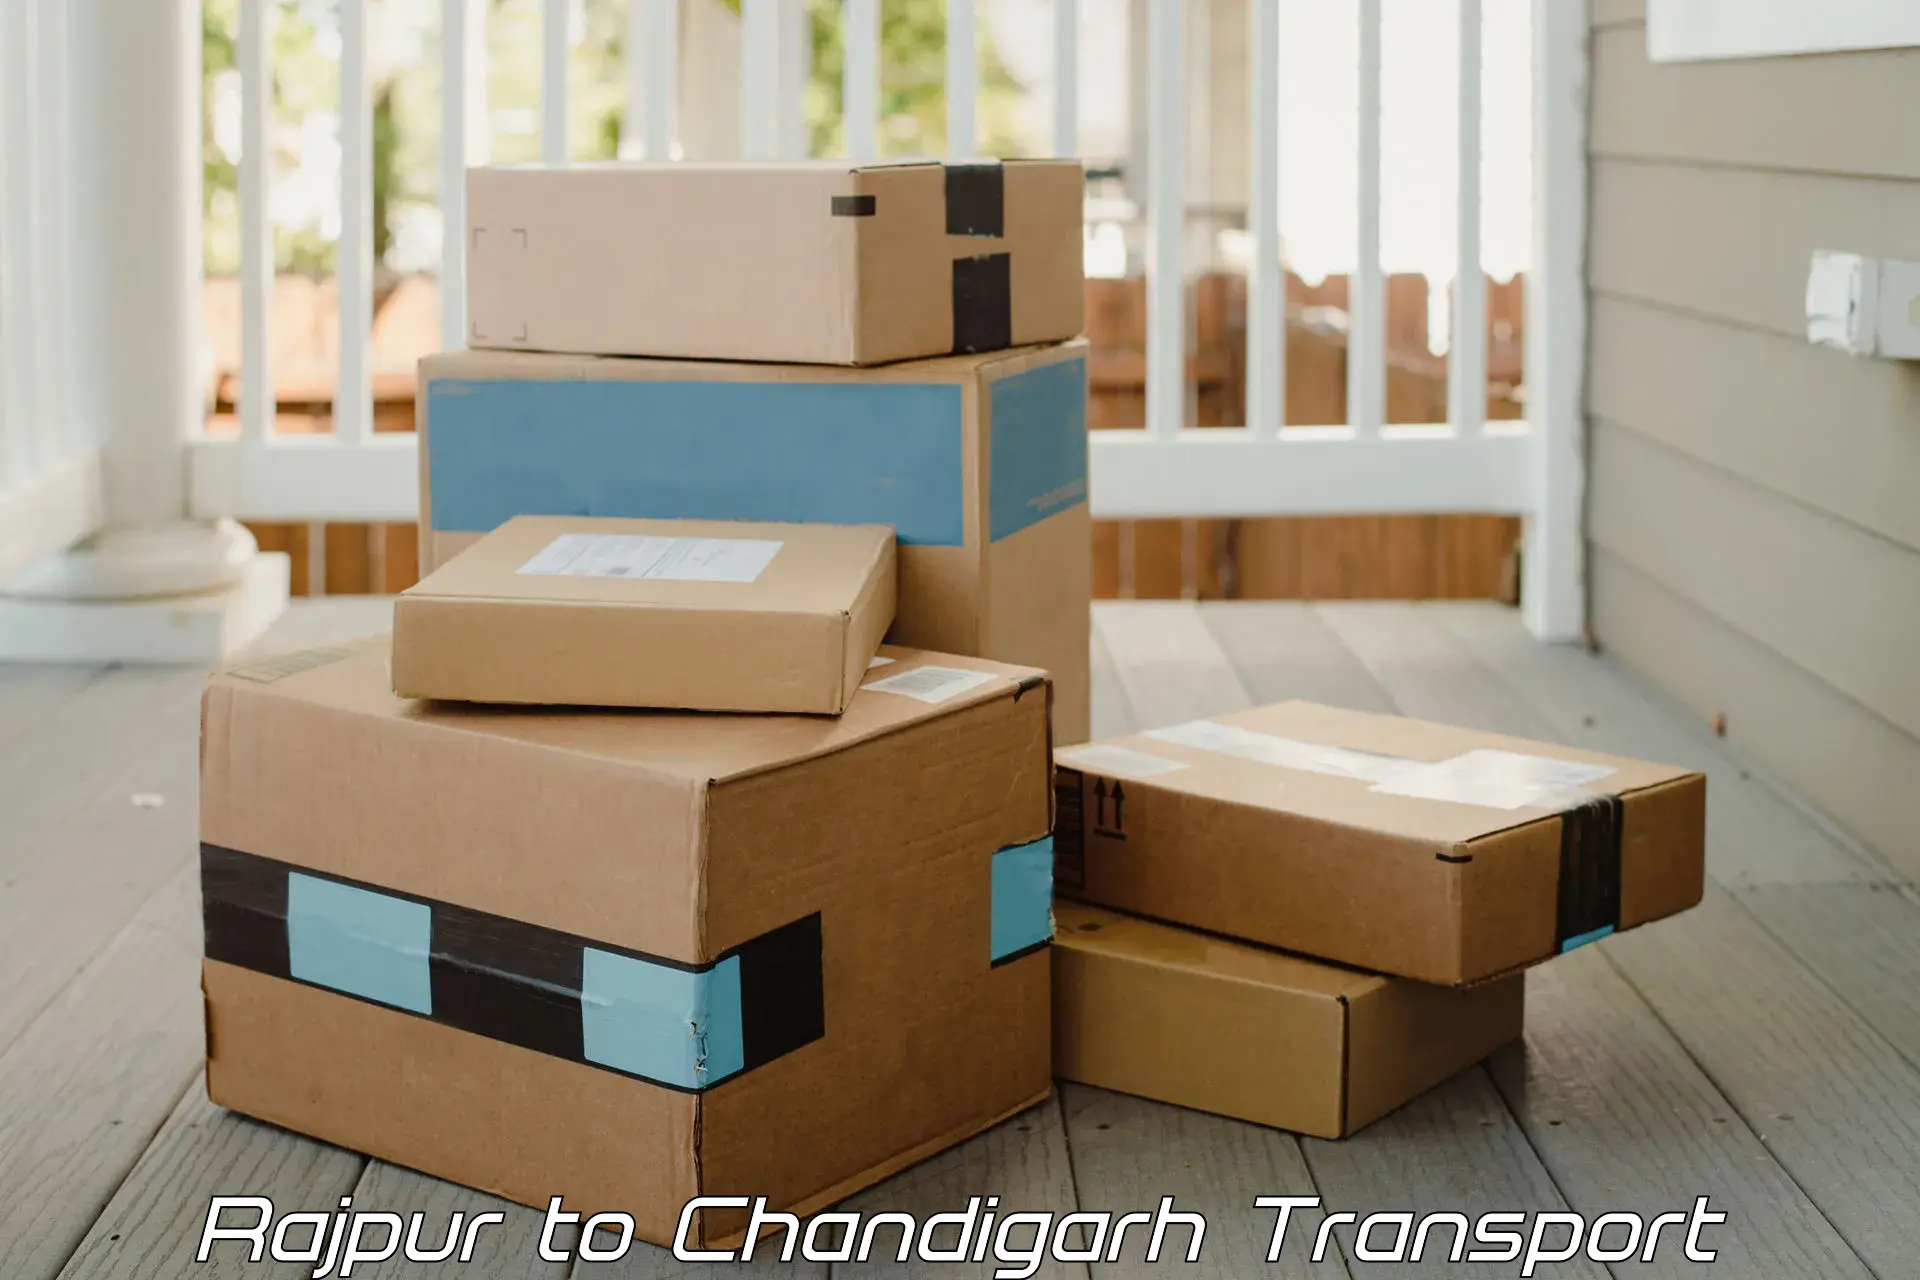 Cycle transportation service in Rajpur to Chandigarh